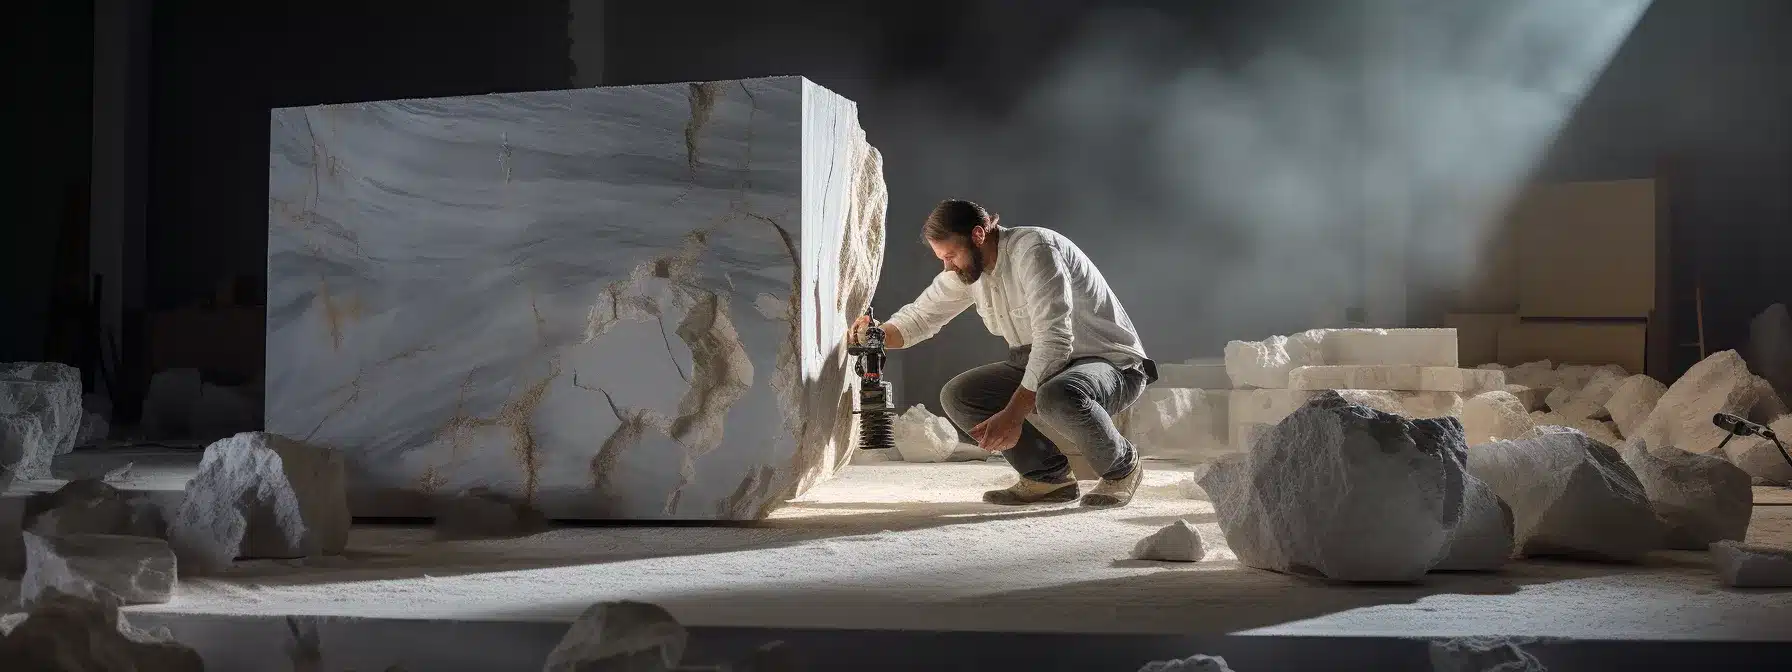 A Sculptor Chipping Away At A Raw Marble Block, Crafting An Extraordinary Narrative.